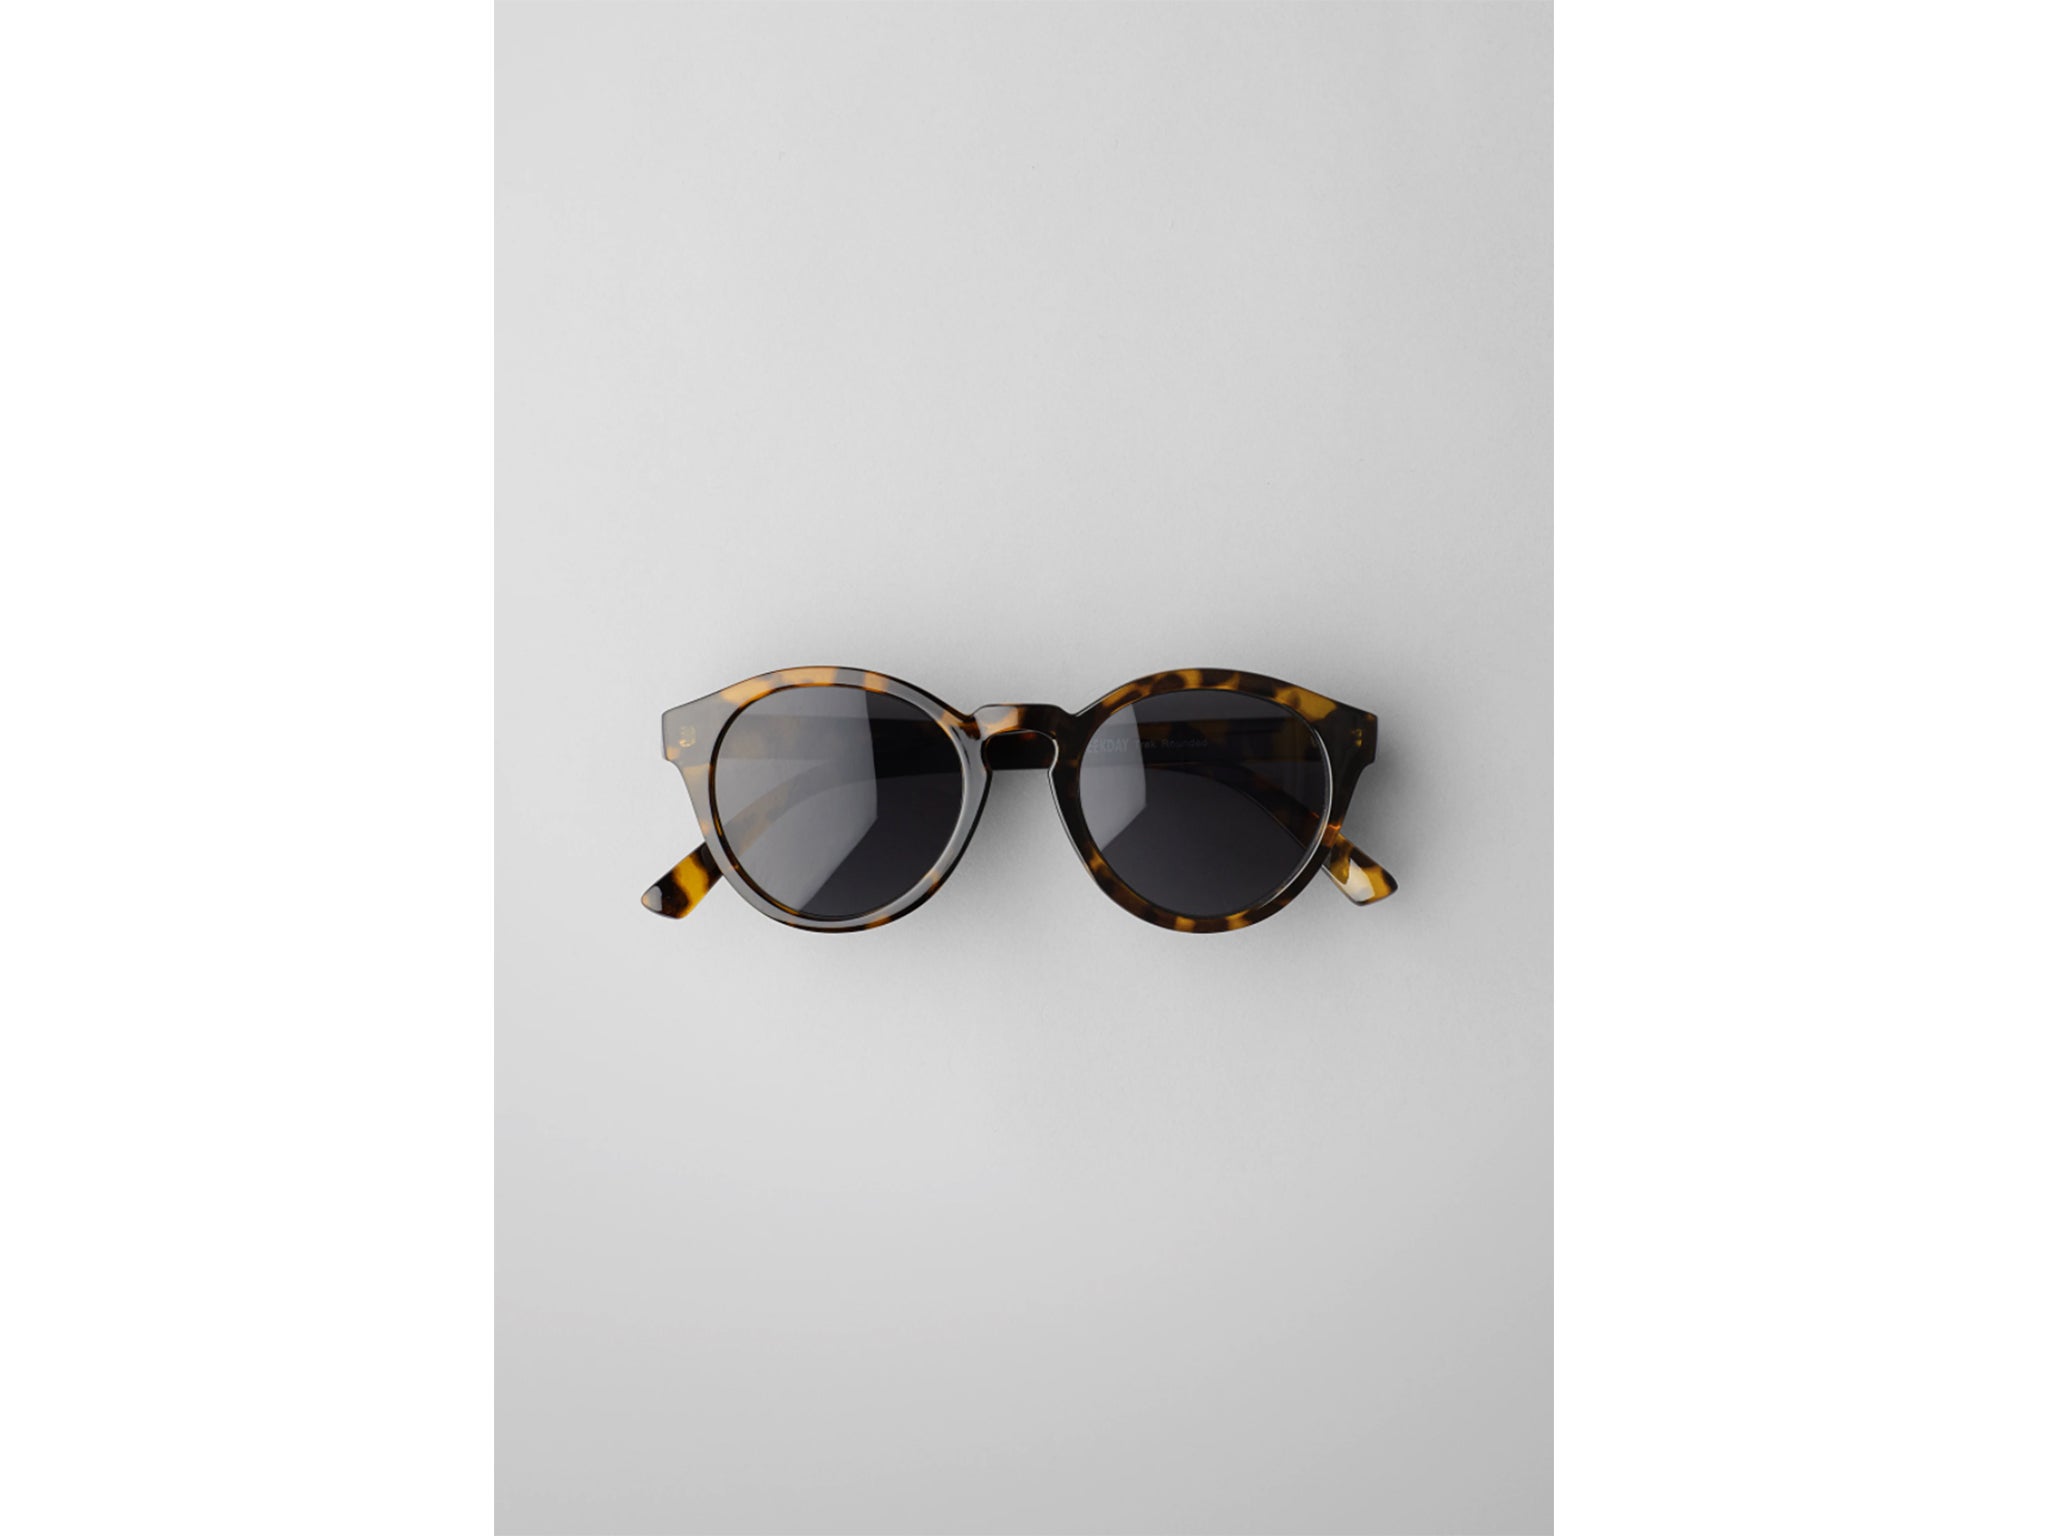 Keep the sun out of your eyes with a pair of stylish shades